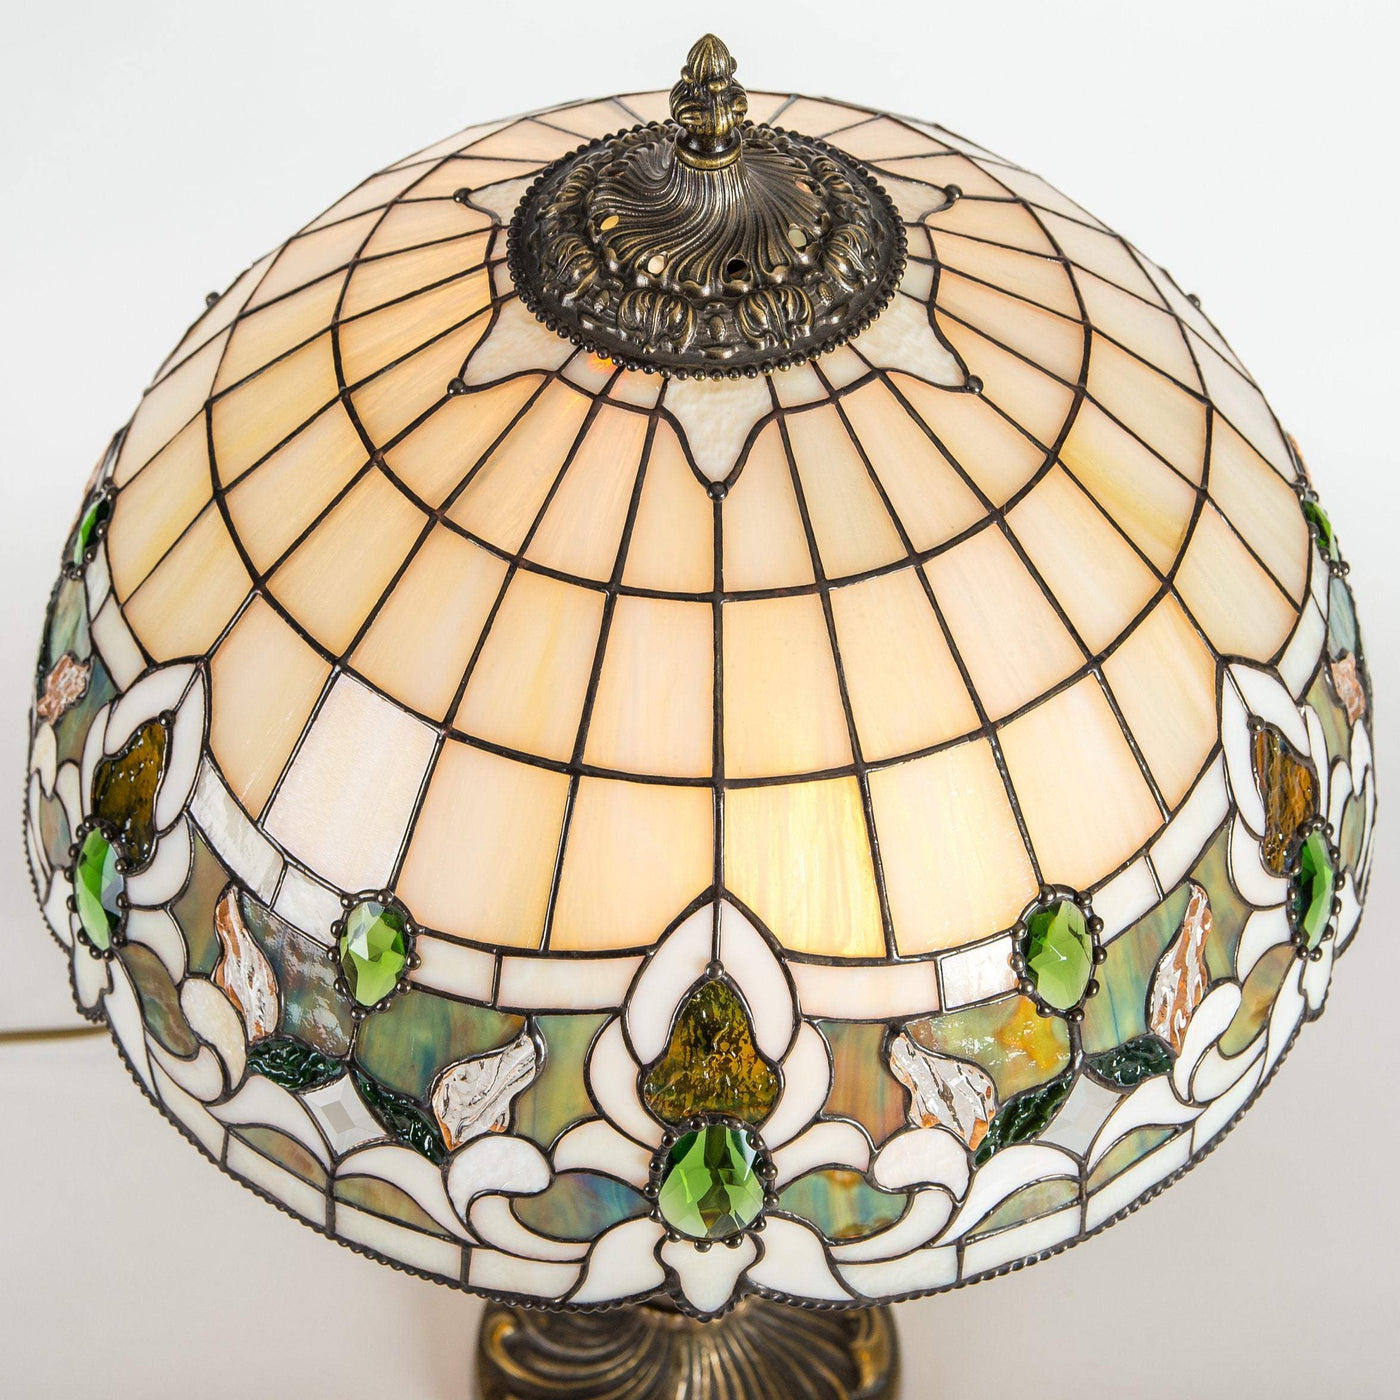 Top view of stained glass Tiffany lamp in beige and green colours